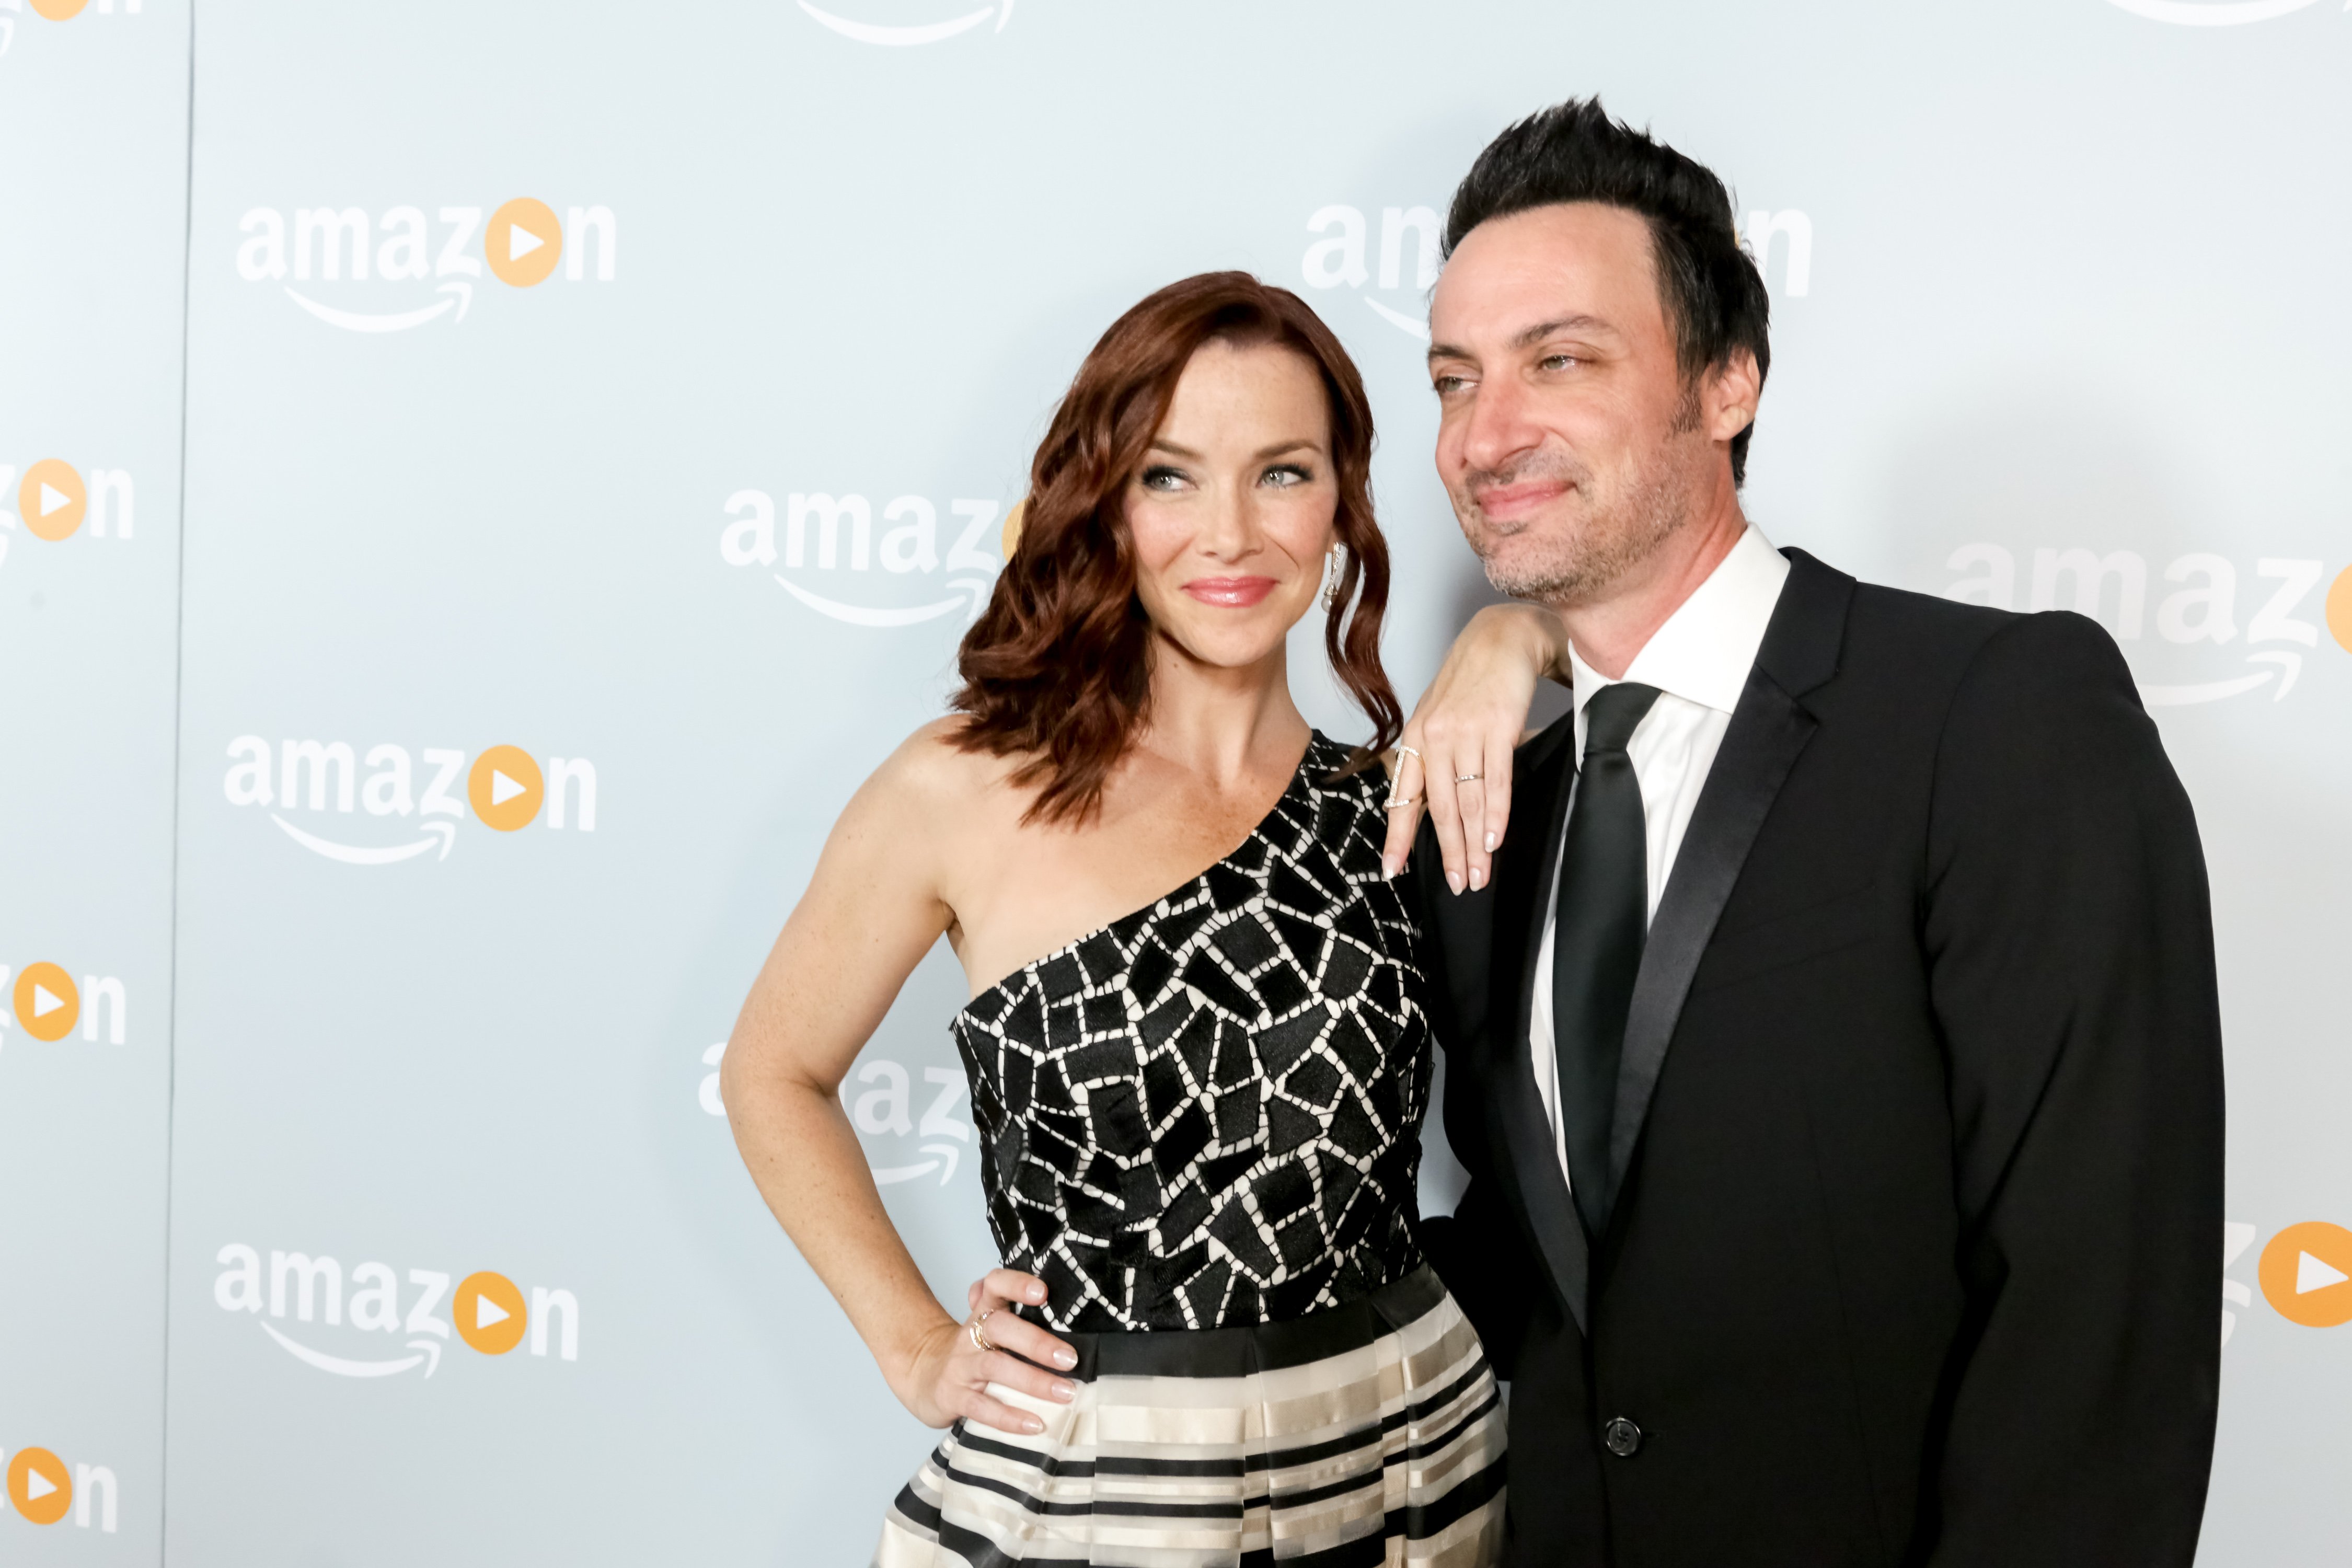 Annie Wersching and Stephen Full arrive at the Amazon's Emmy Celebration at the Sunset Tower Hotel, on September 18, 2016, in West Hollywood, California. | Source: Getty Images